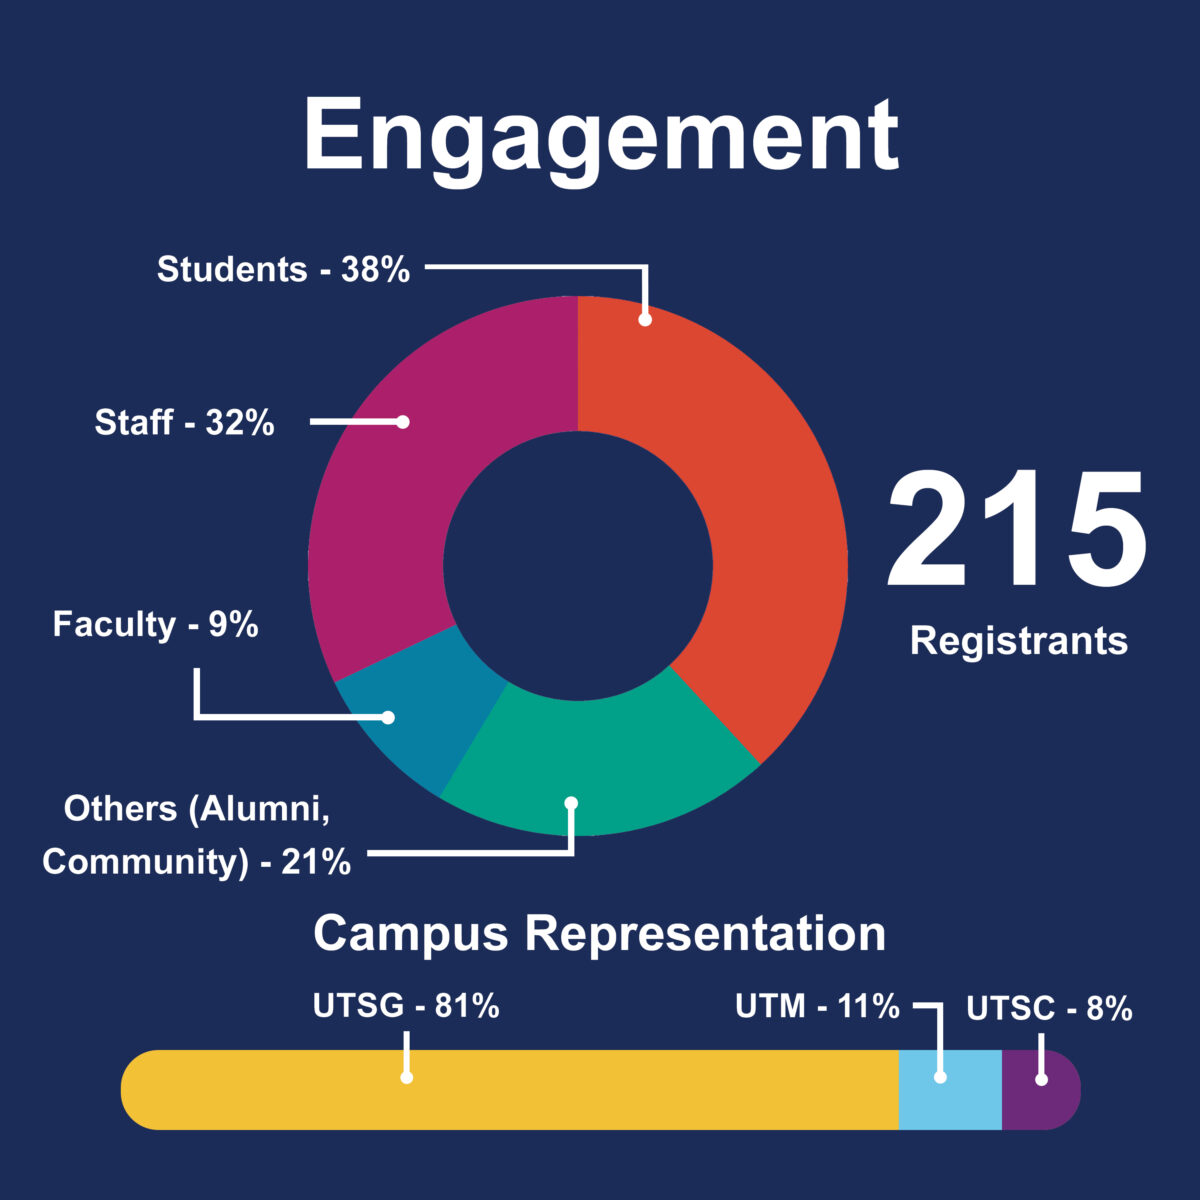 Engagement Info Graphic: 215 registrants, 38% students, 32% staff, 9% faculty, 21% other